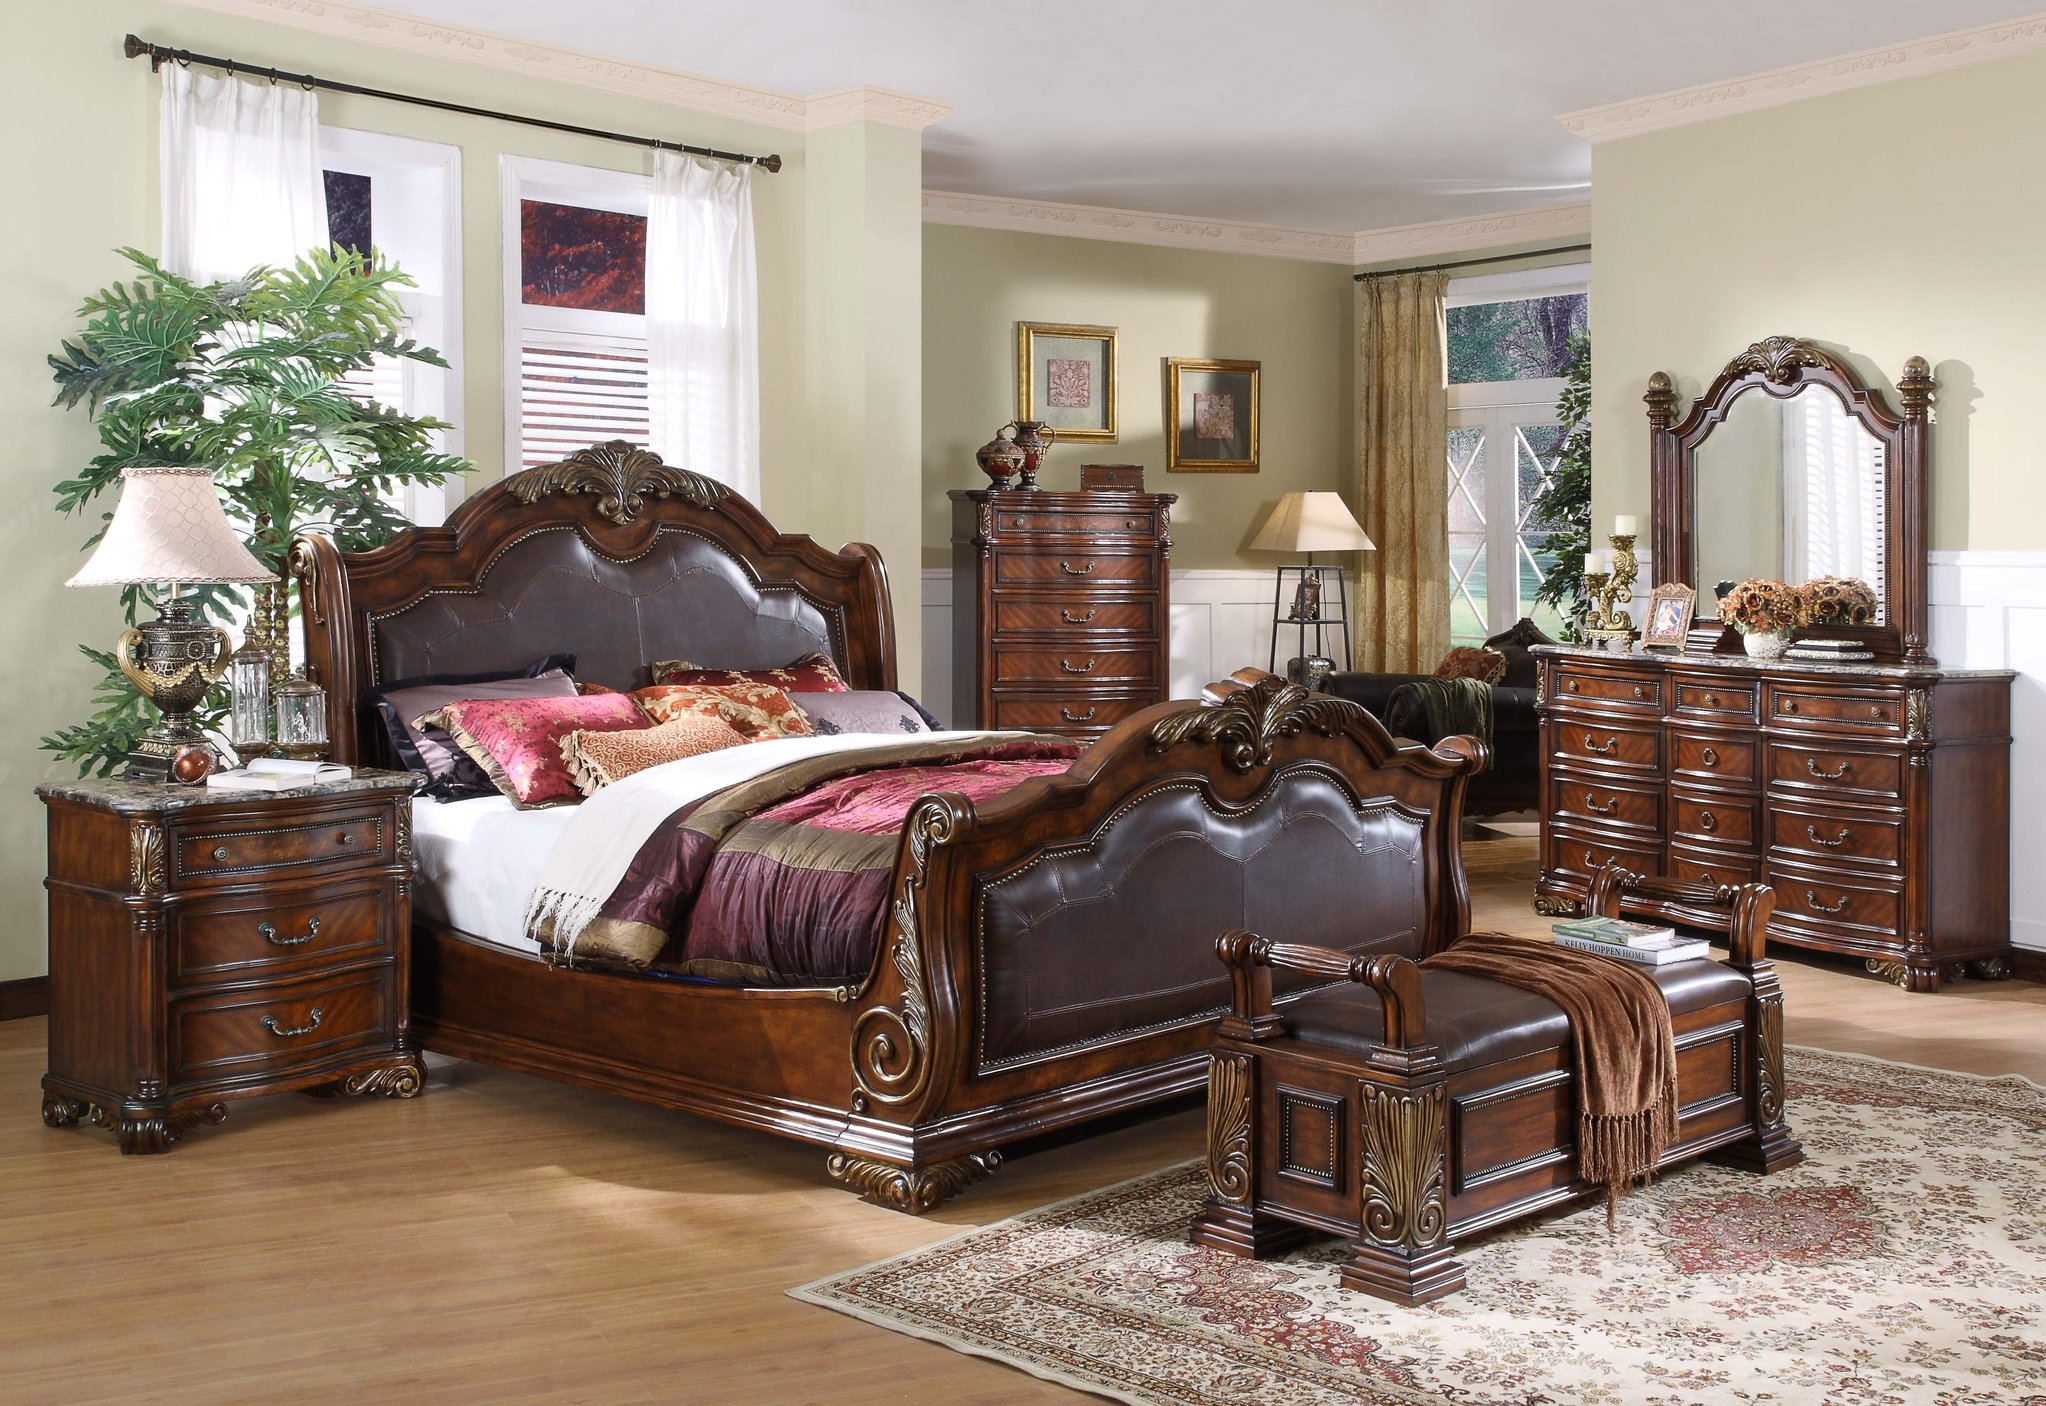 Sleigh Bedroom Collection Leather Headboardfootboard Leather in size 2046 X 1406